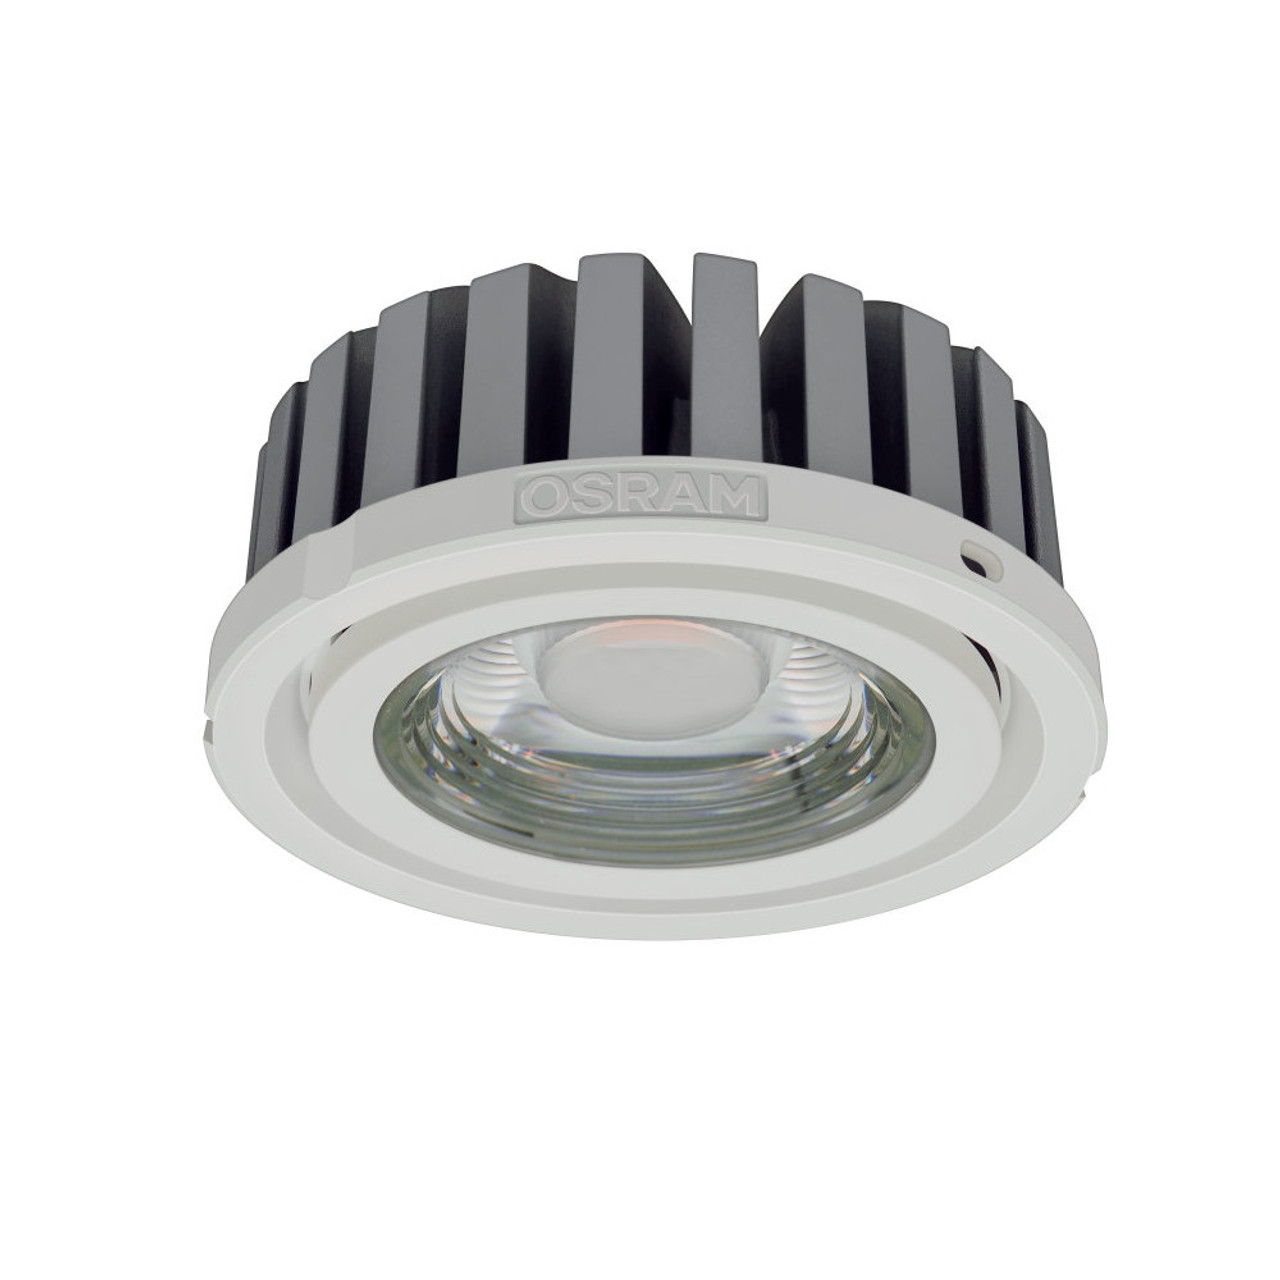 LED 1050mA Constant Current 36.9W Dimmable 927 2700K 3000lm 60 degrees COB